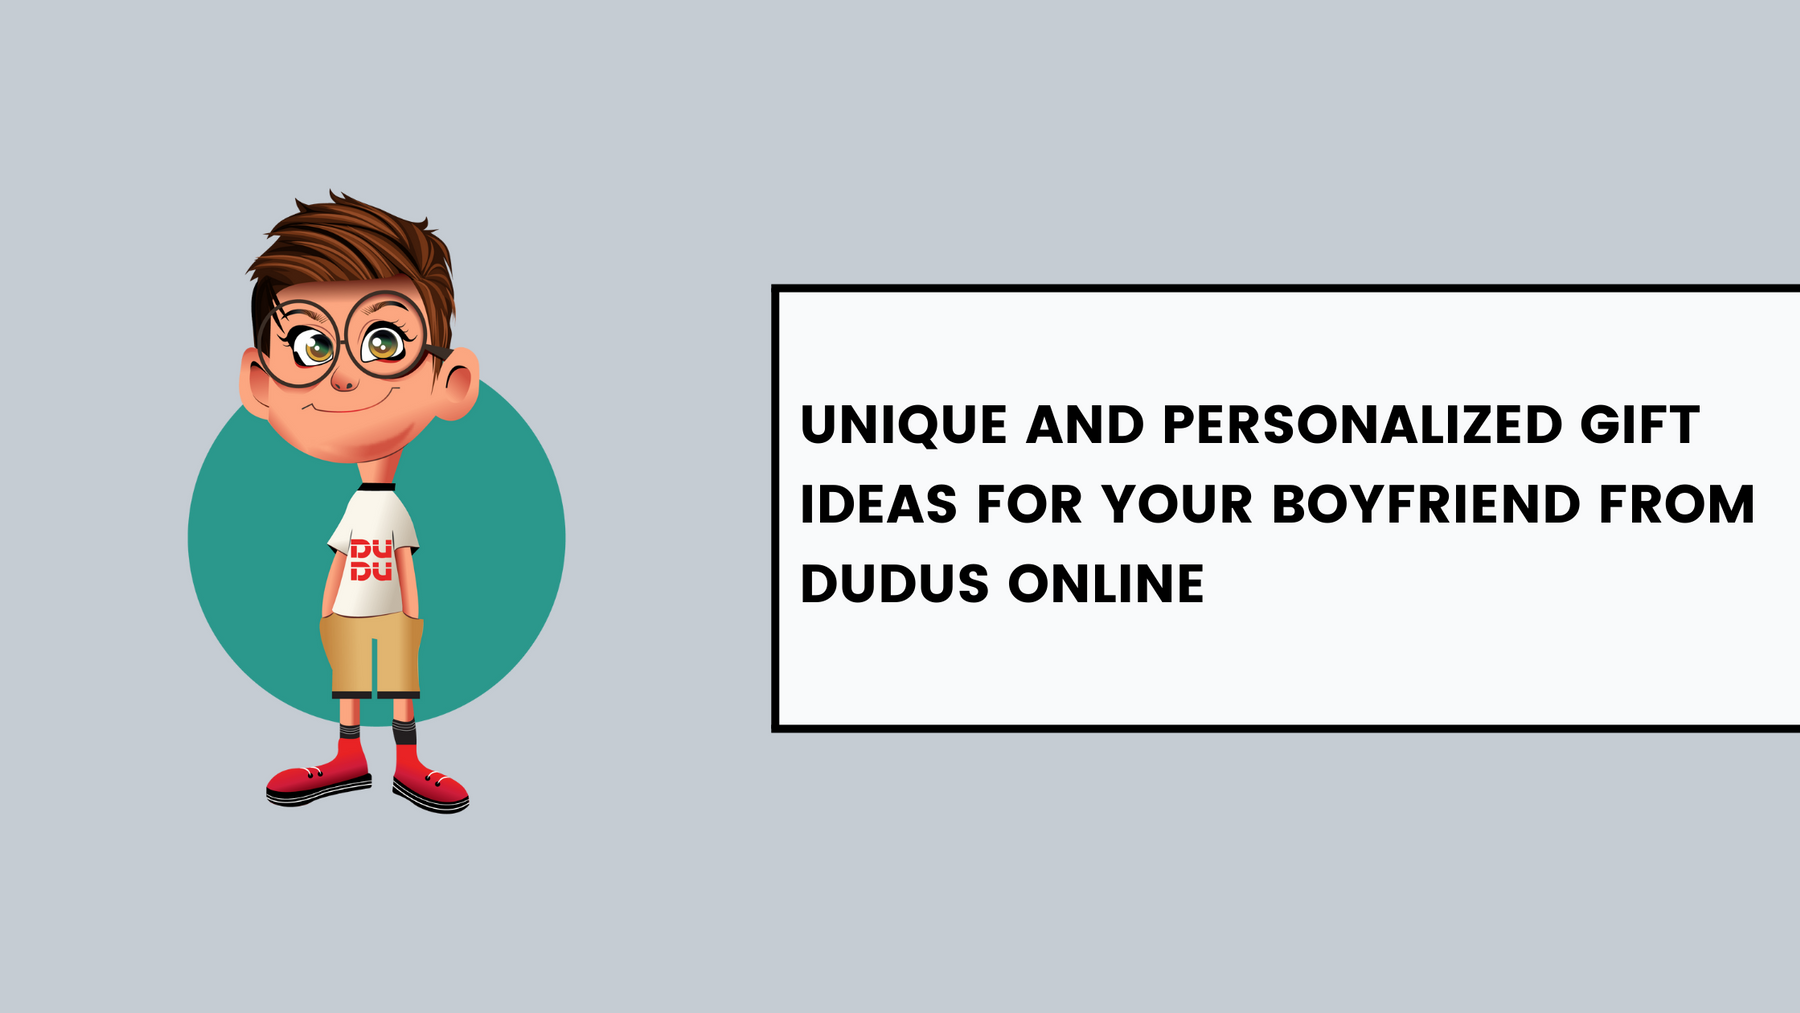 Unique and Personalized Gift Ideas for Your Boyfriend from Dudus Online